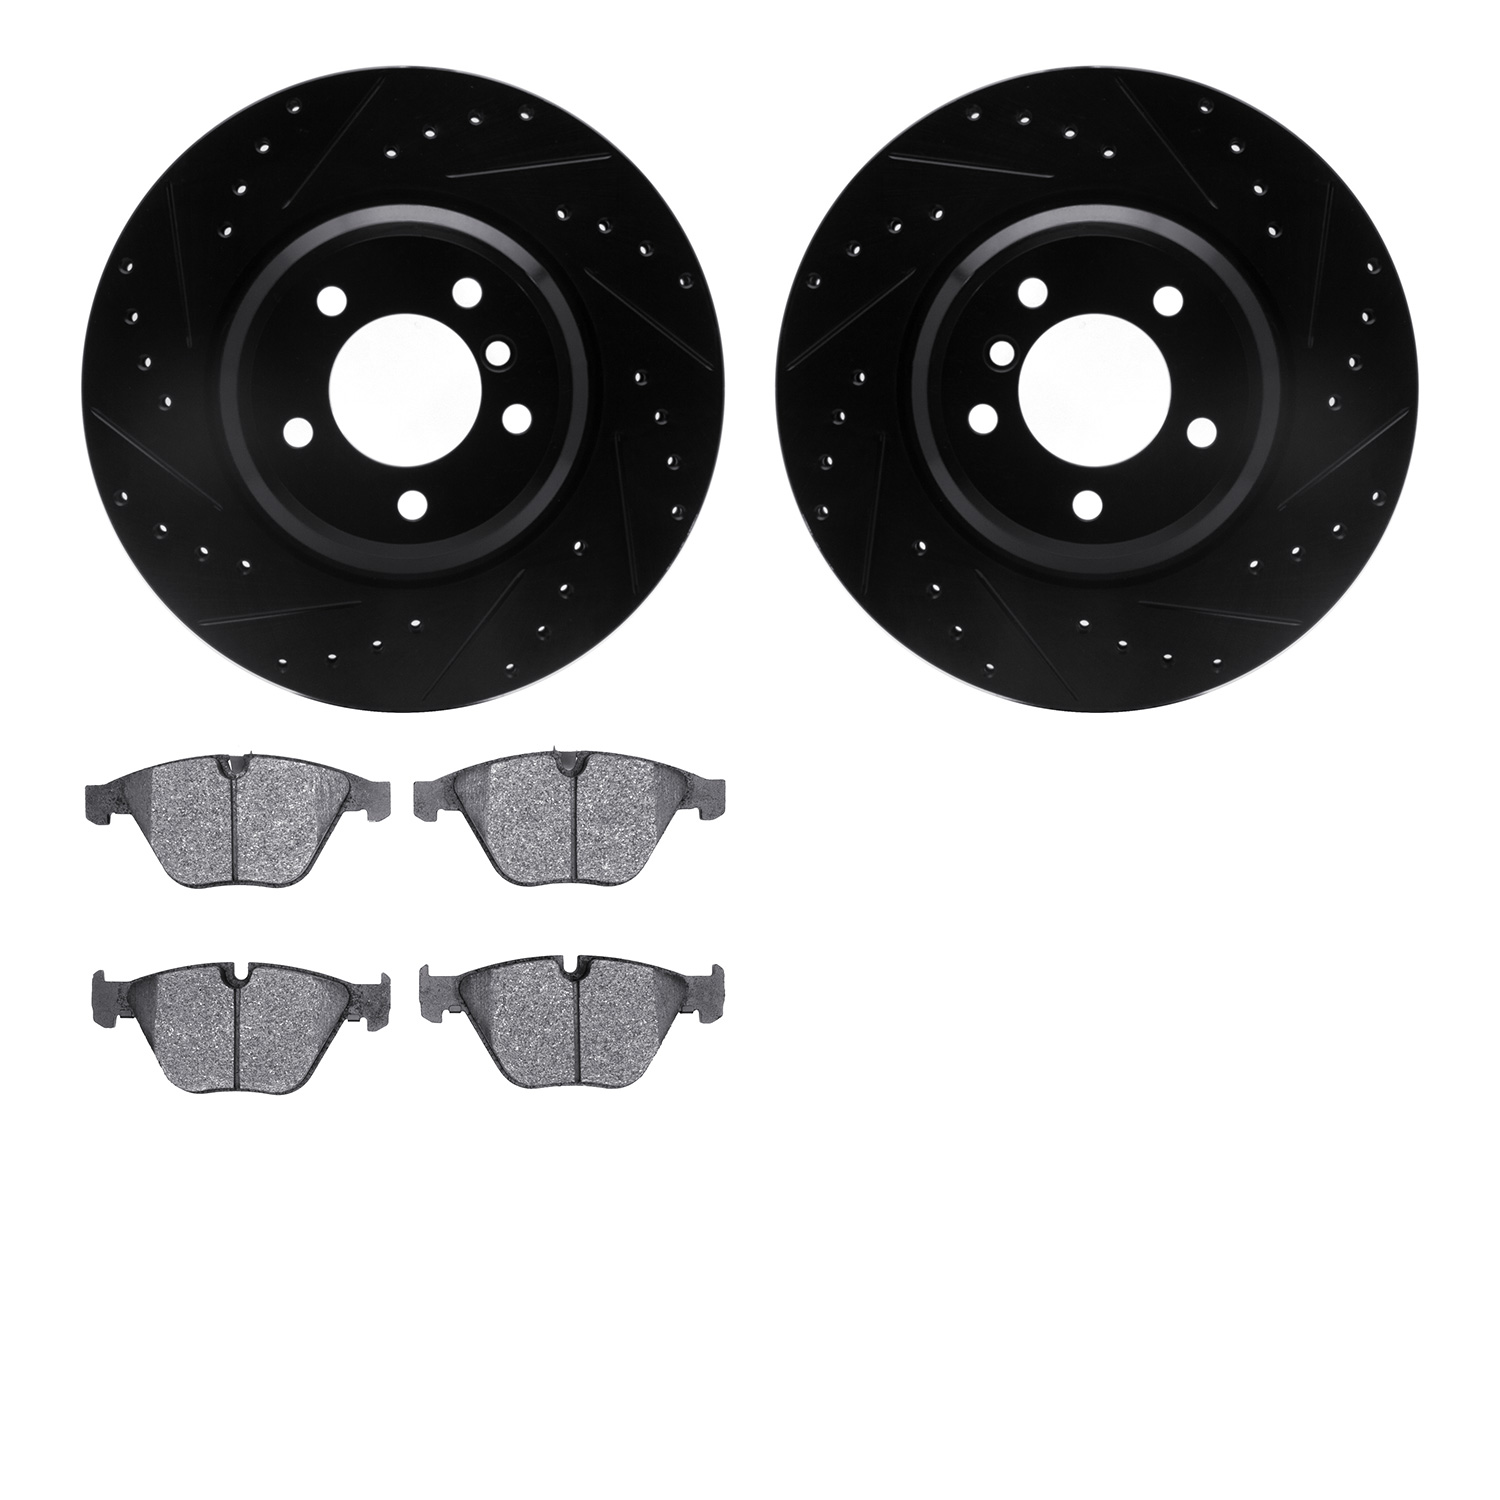 8302-31070 Drilled/Slotted Brake Rotors with 3000-Series Ceramic Brake Pads Kit [Black], 2007-2015 BMW, Position: Front